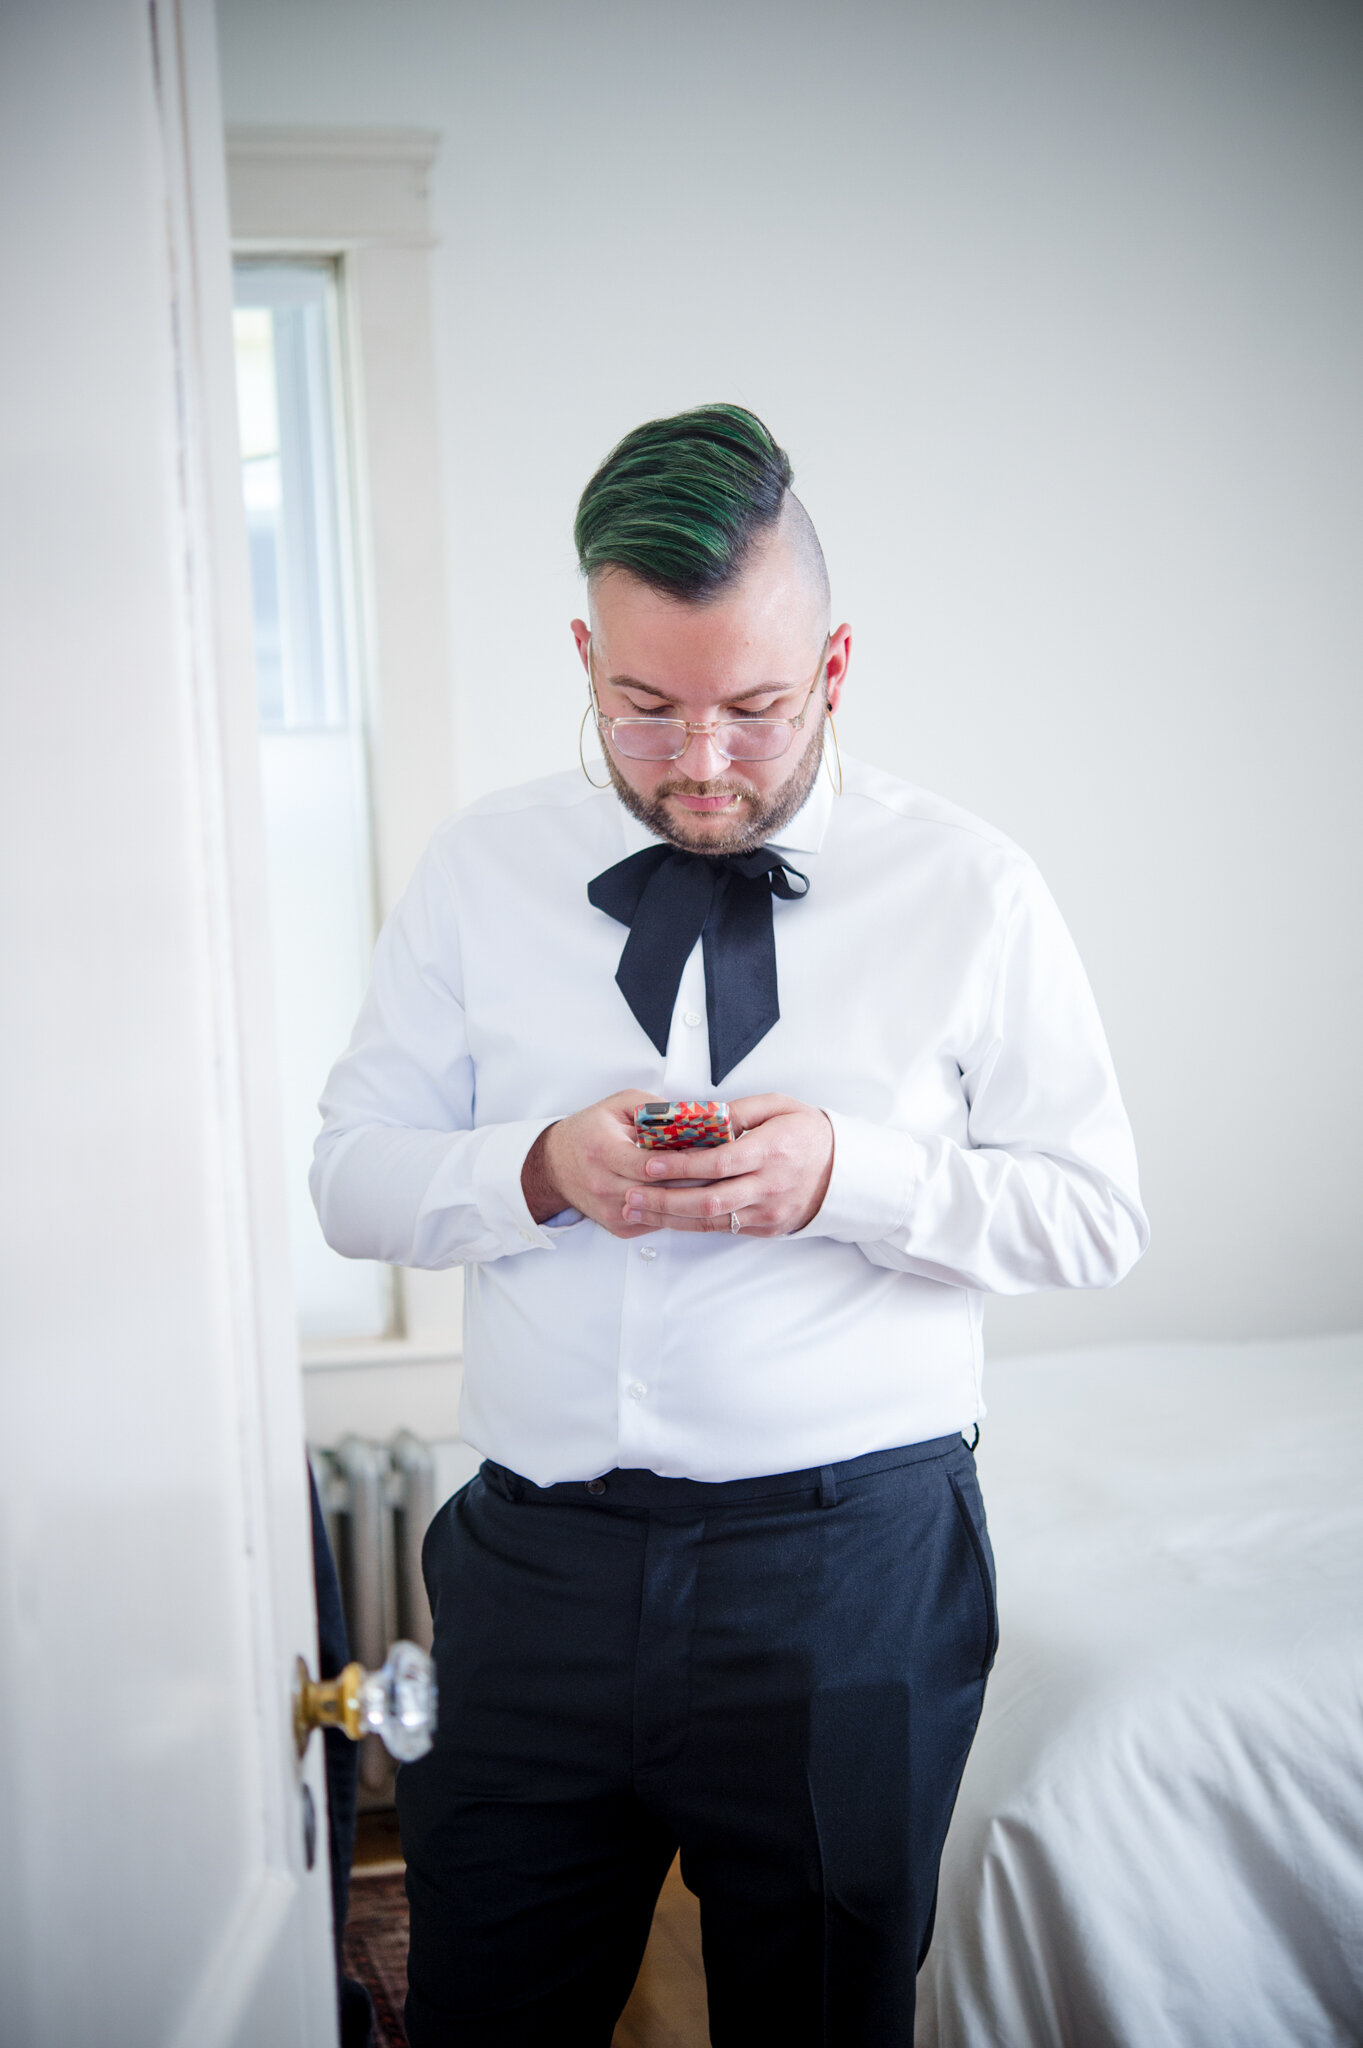 Marrier in white shirt and tie checks phone while getting ready before ceremony at Roger Williams Botanical Center Providence Rhode Island Michelle Schapiro New England Wedding Photographer